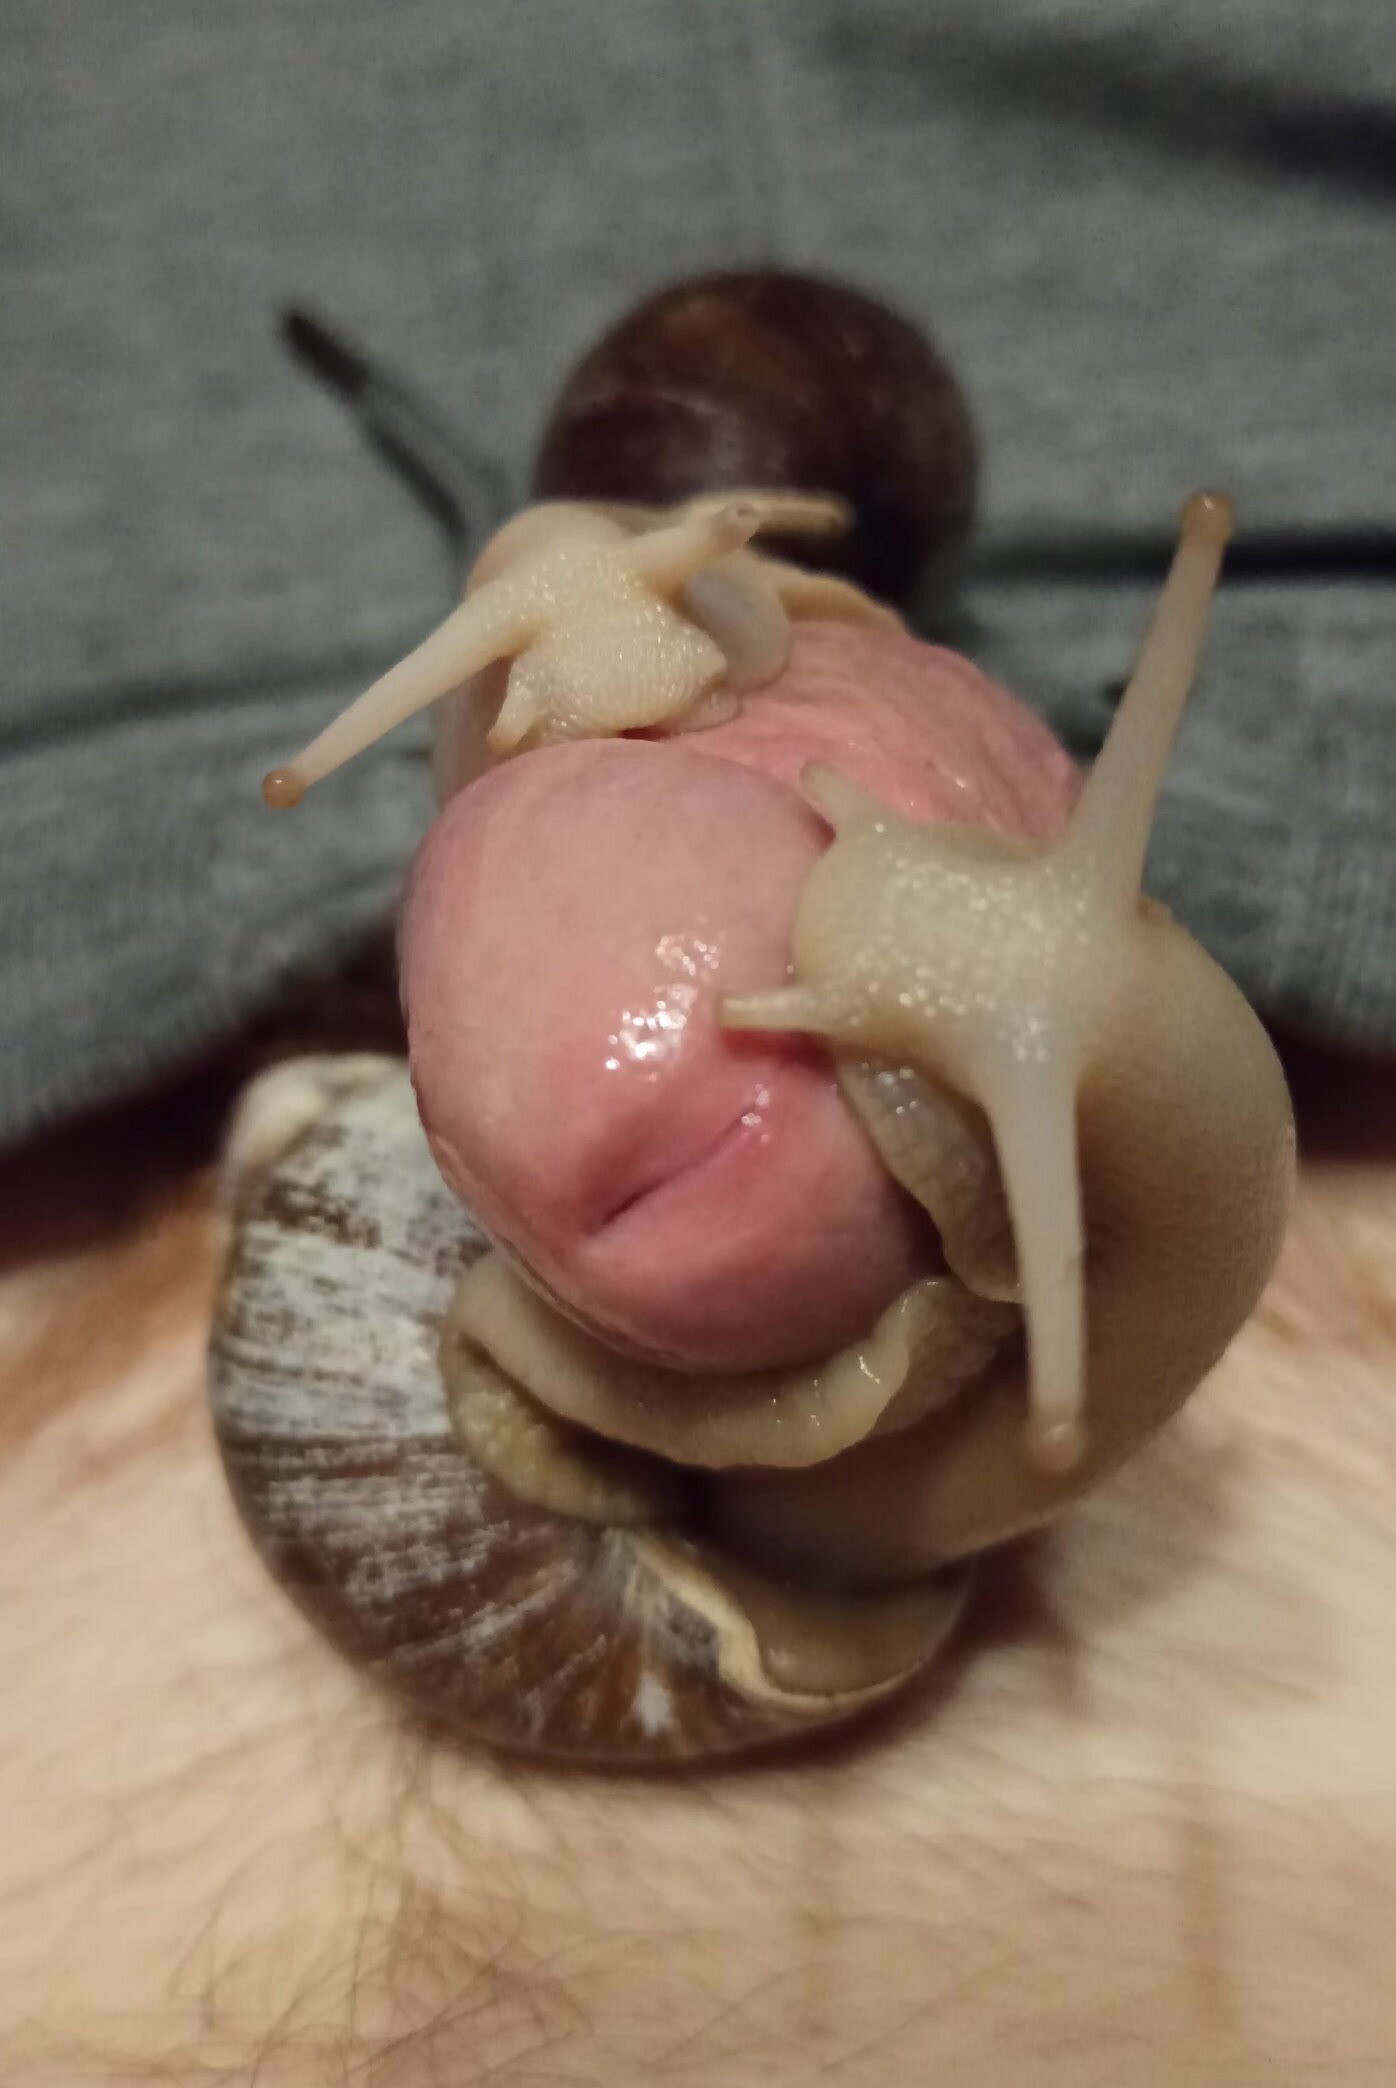 Two giant, slimy snails on my cock make me throb